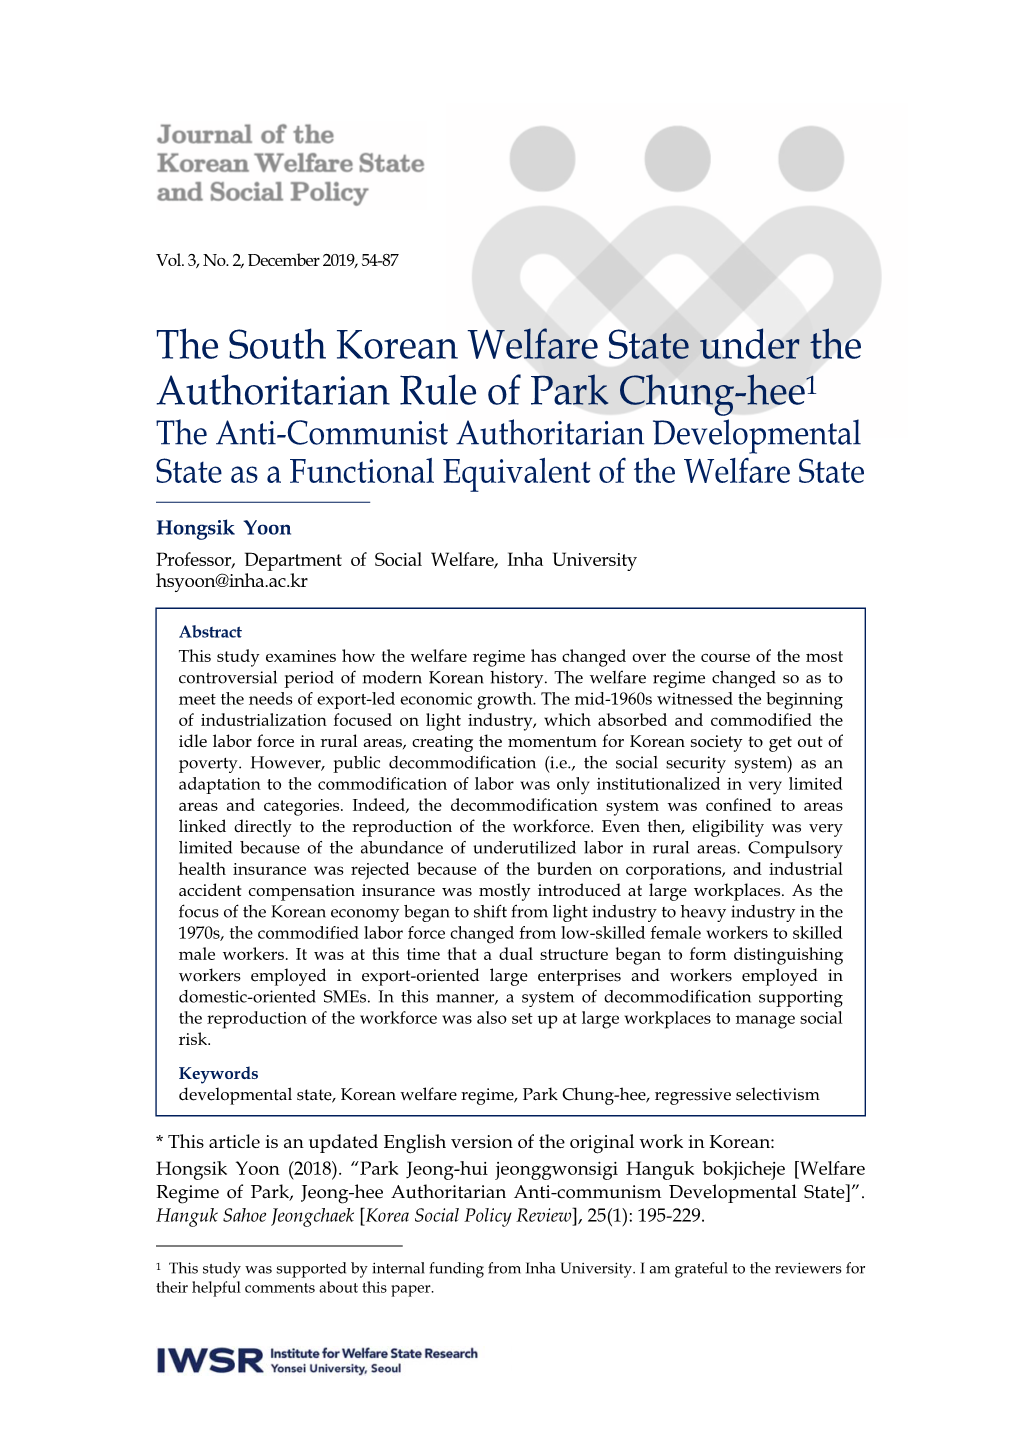 The South Korean Welfare State Under the Authoritarian Rule of Park